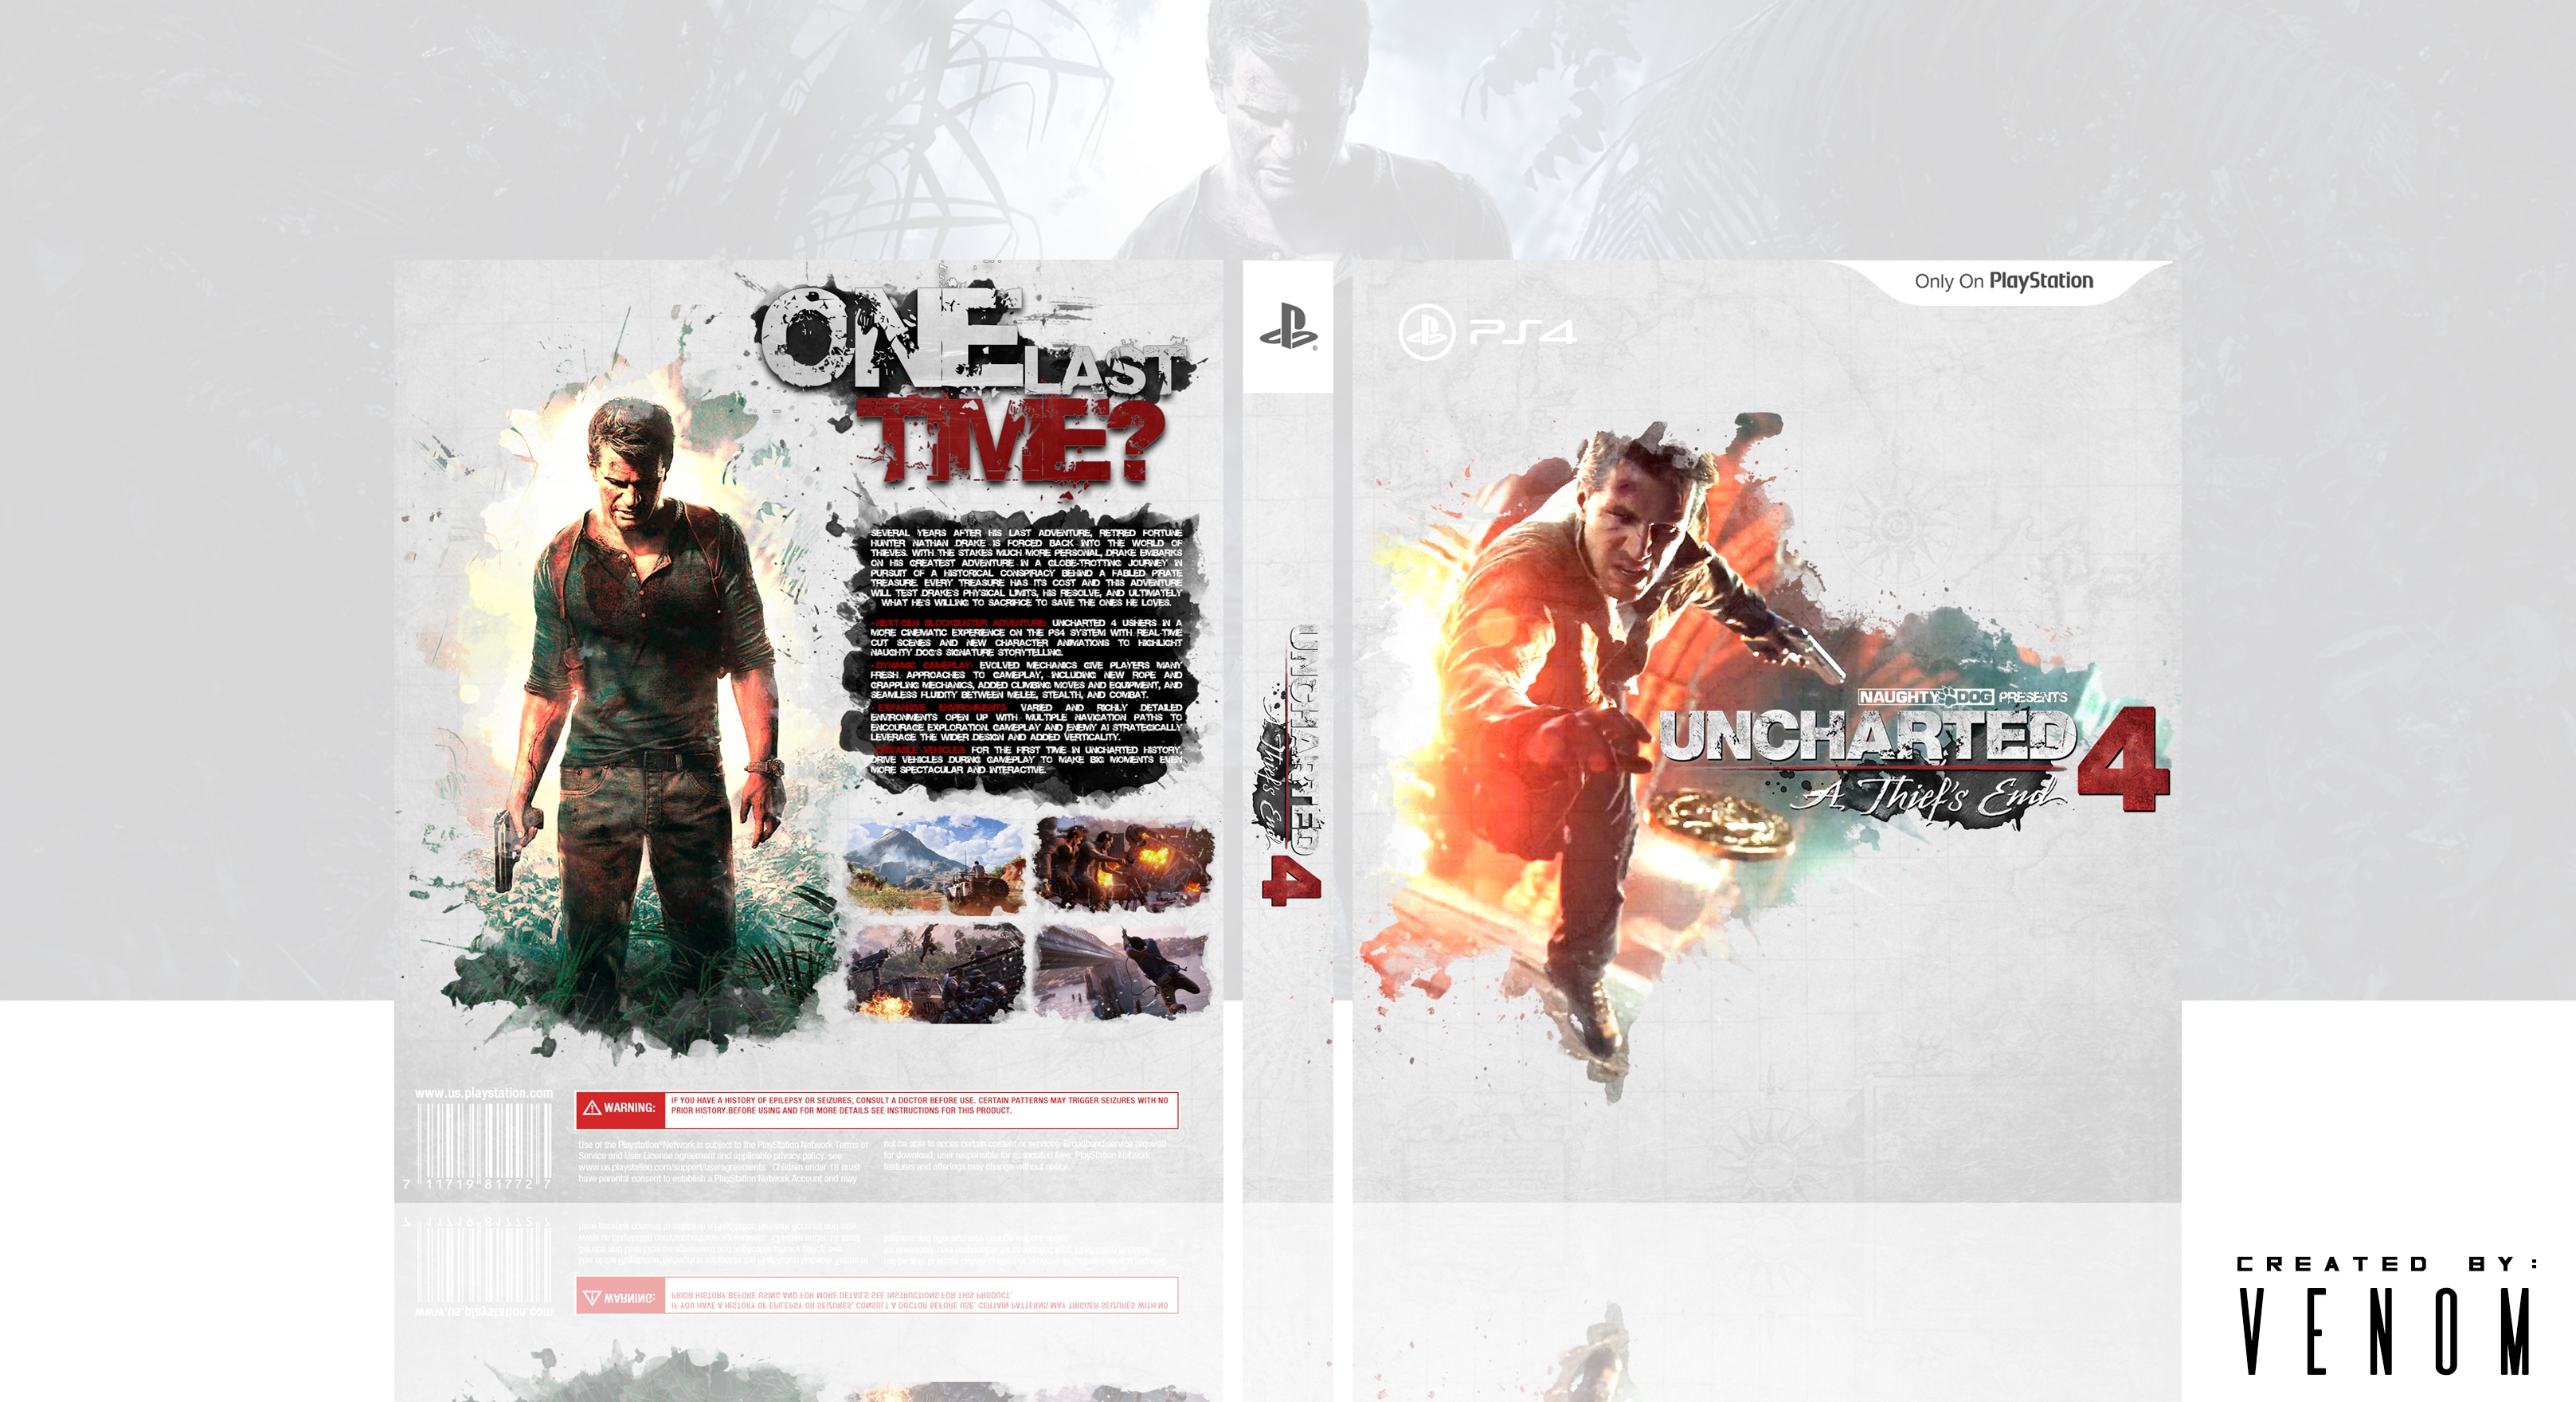 Uncharted 4: A Thief's End box cover